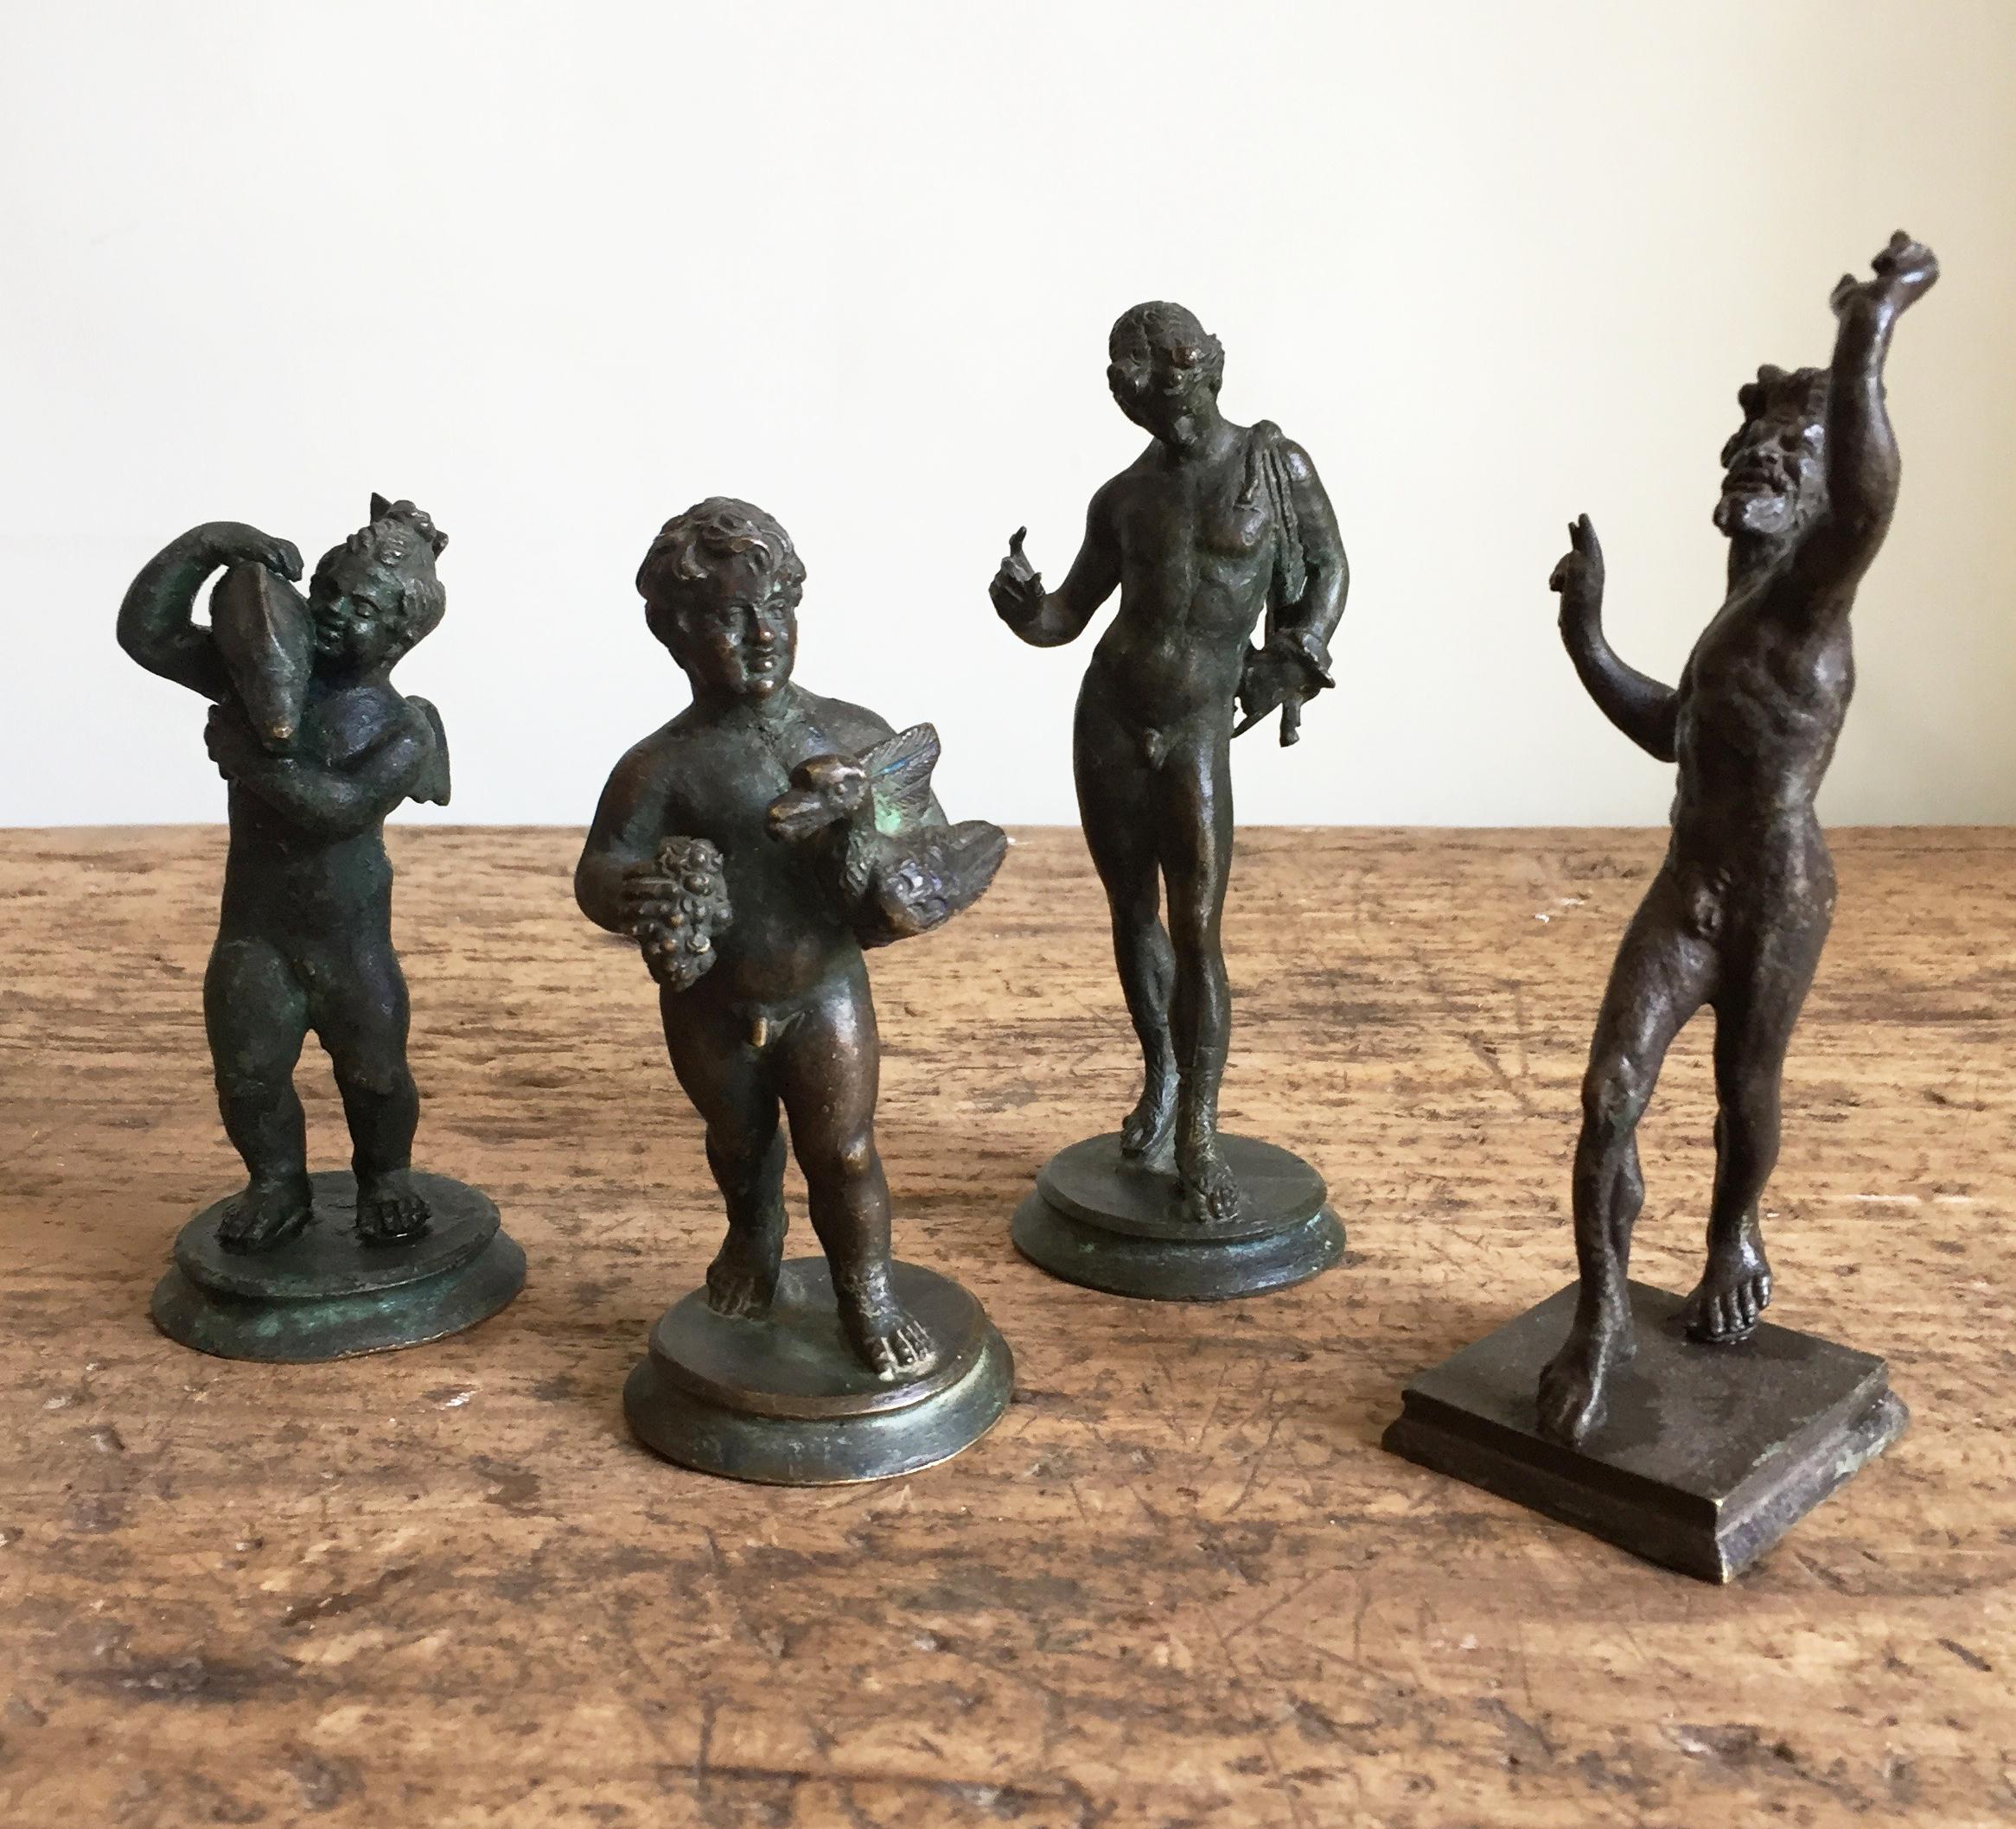 A group of four grand tour bronzes from Pompeii.

The small pair both being fountain heads, known as Amore con Delfino and Putta con Oca.

The larger pair is the dancing faun and narcissus.

A wonderful group of rare statues. Most probably